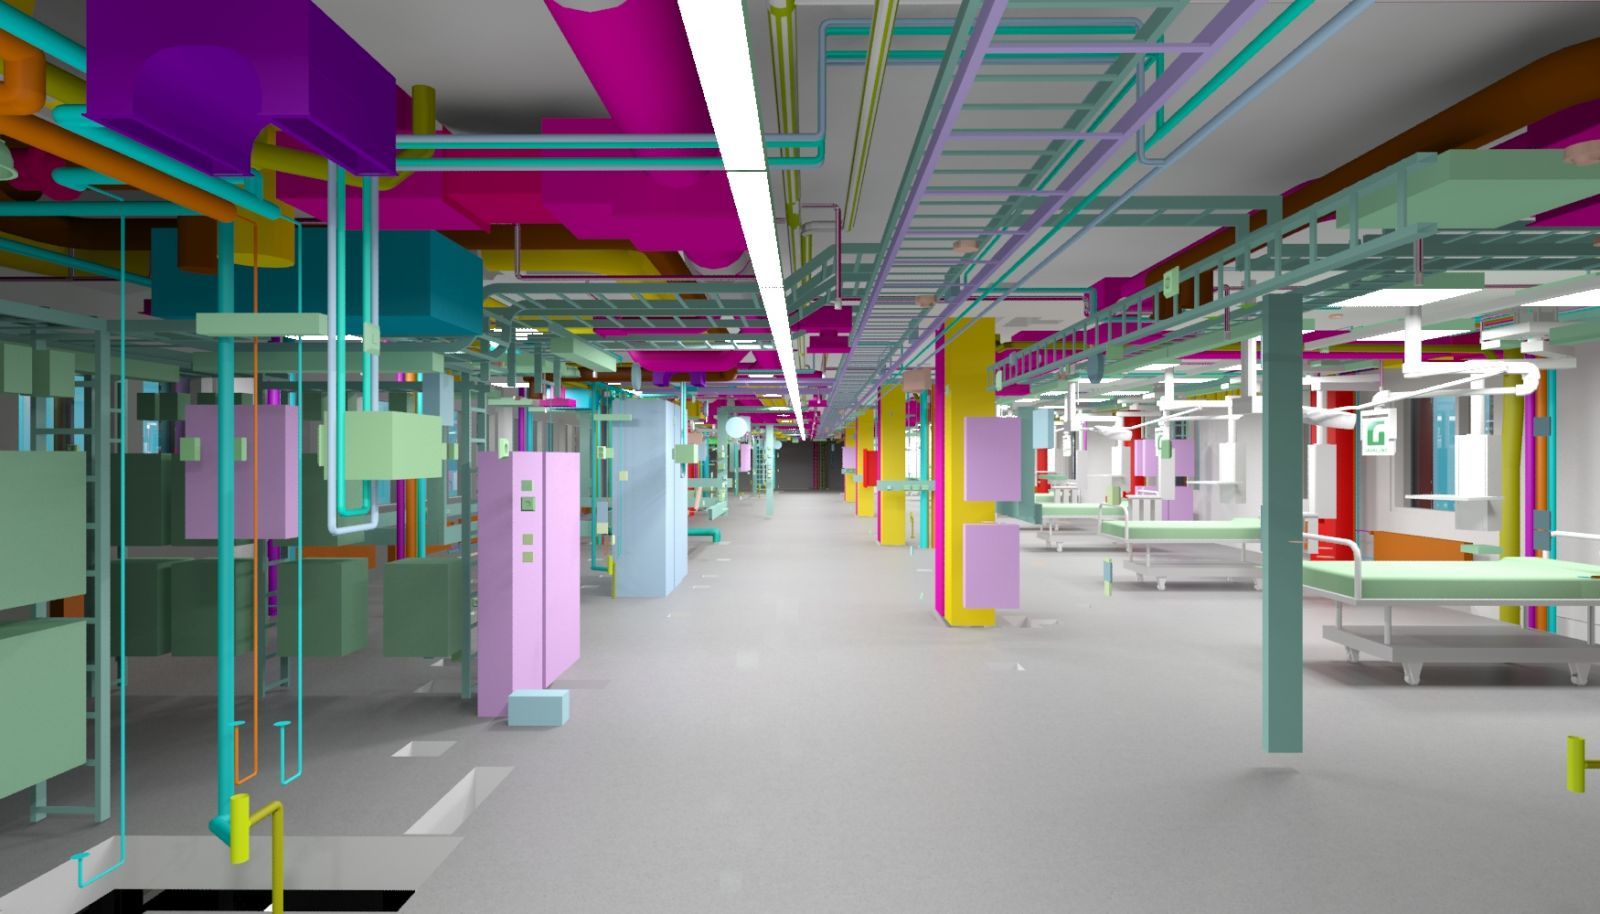 Figure 2: Building Information Modelling (BIM) of hospital interiors in 3D view